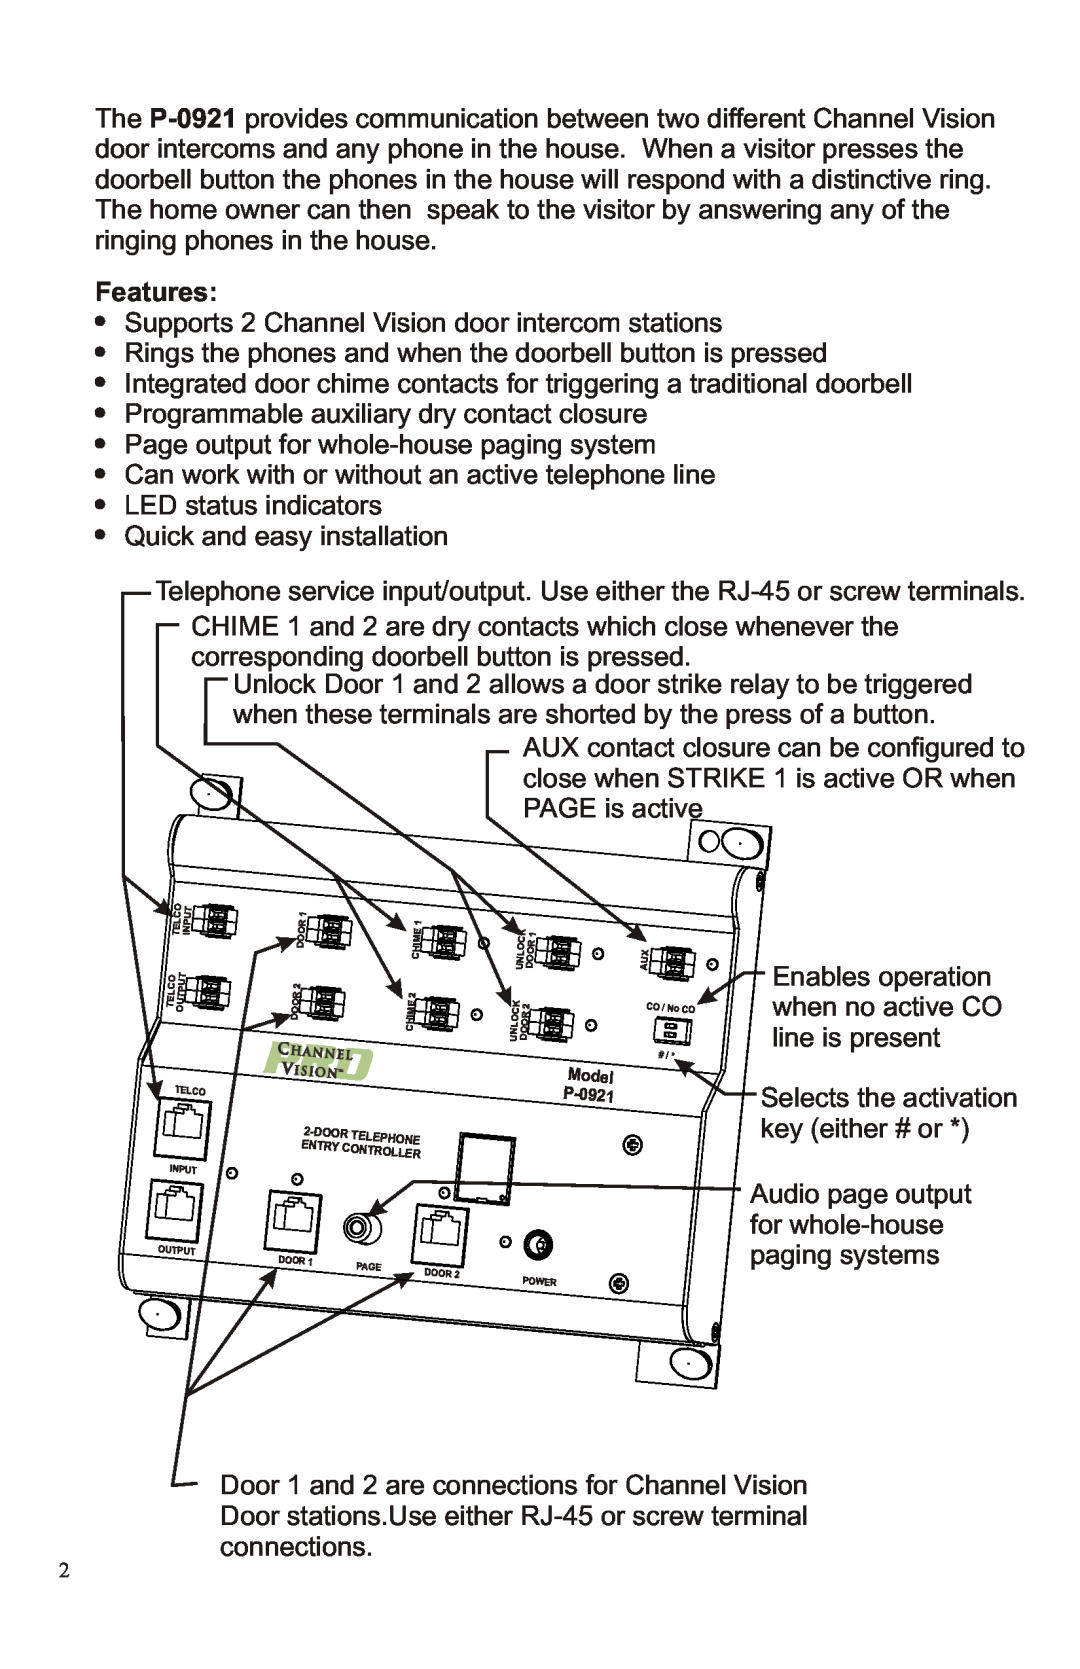 Channel Vision P-0921 manual Features 